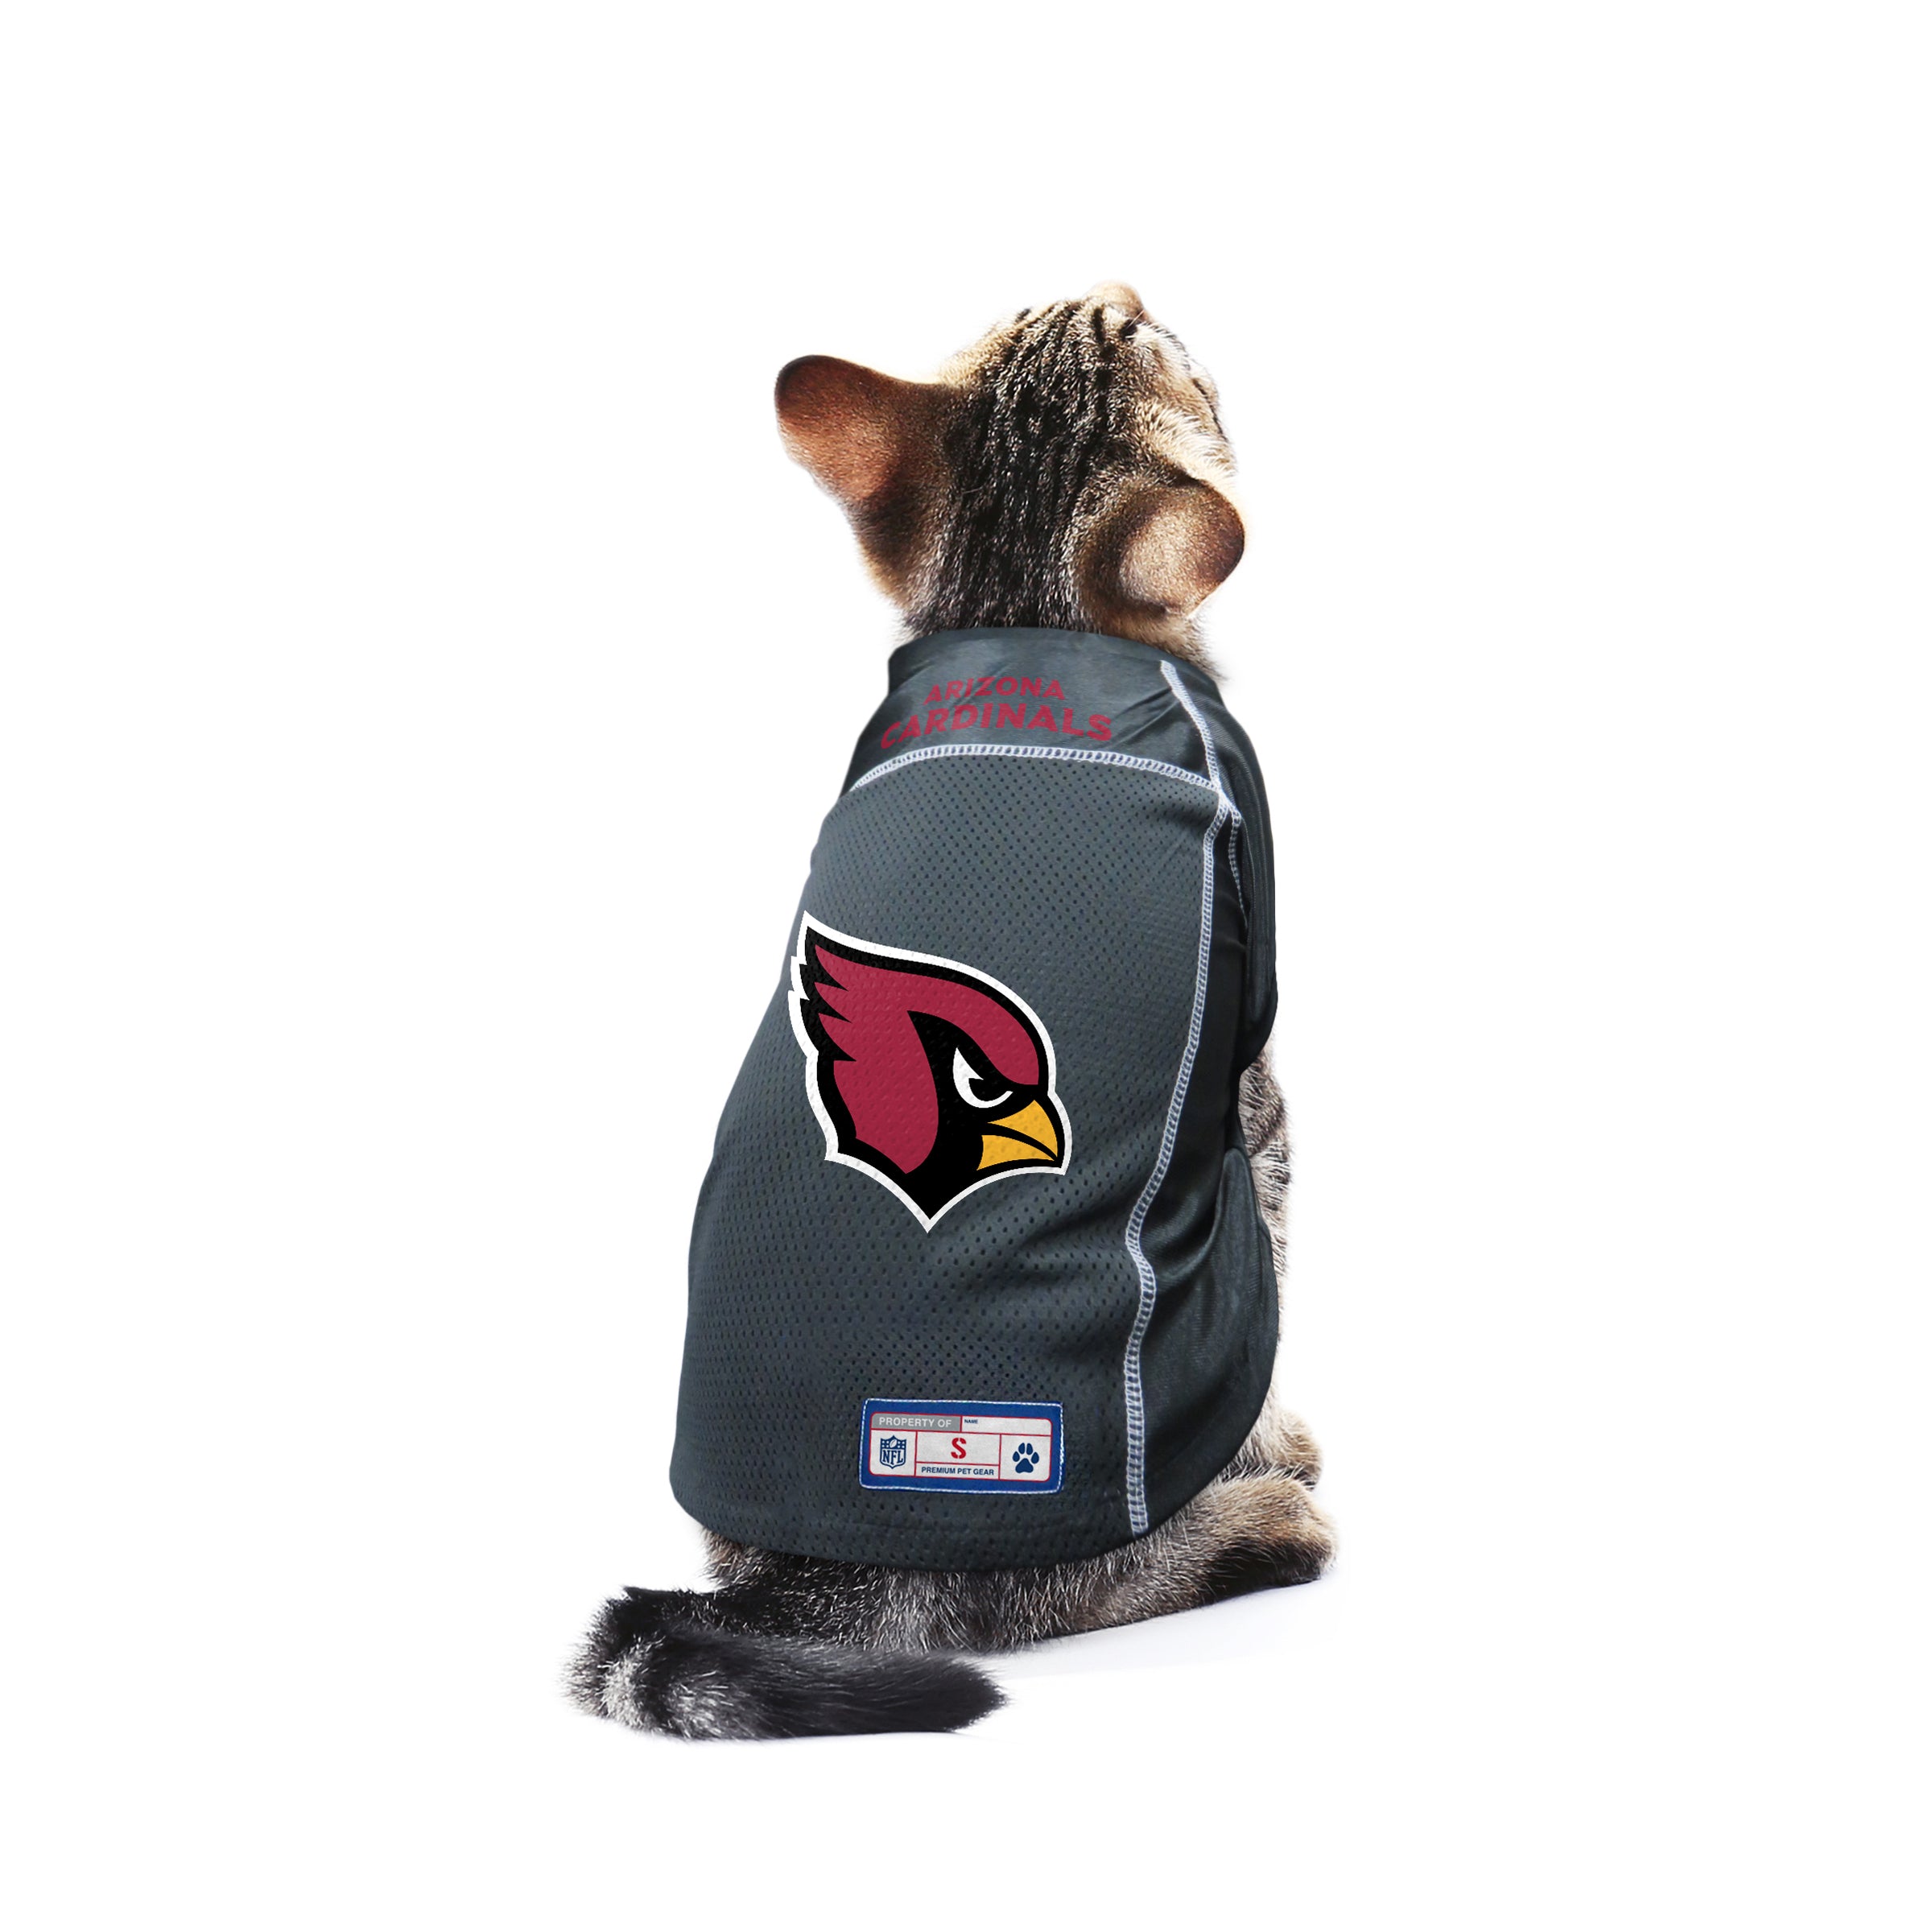 Mirage Pet Products Louisville Cardinals Jersey for Dogs and Cats, X-Small